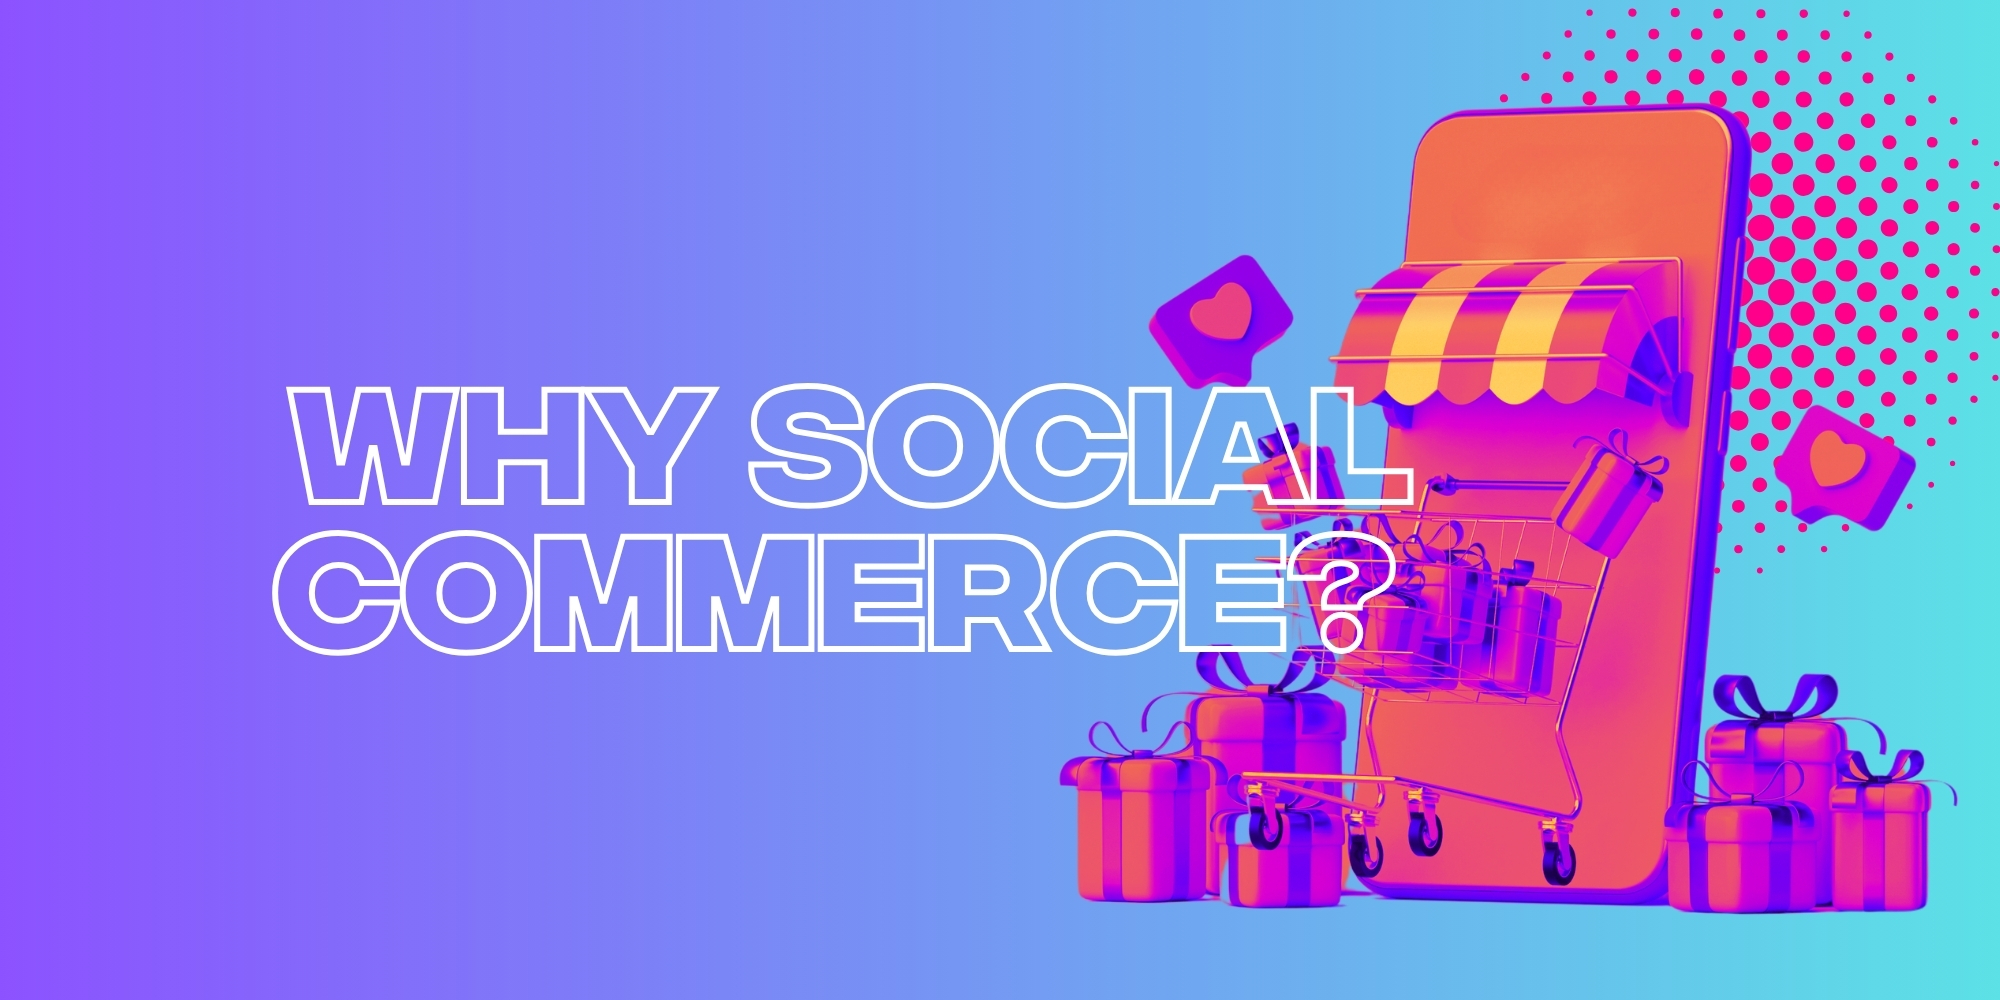 Social Commerce Vs Ecommerce: Which Is Best For Your Brand?